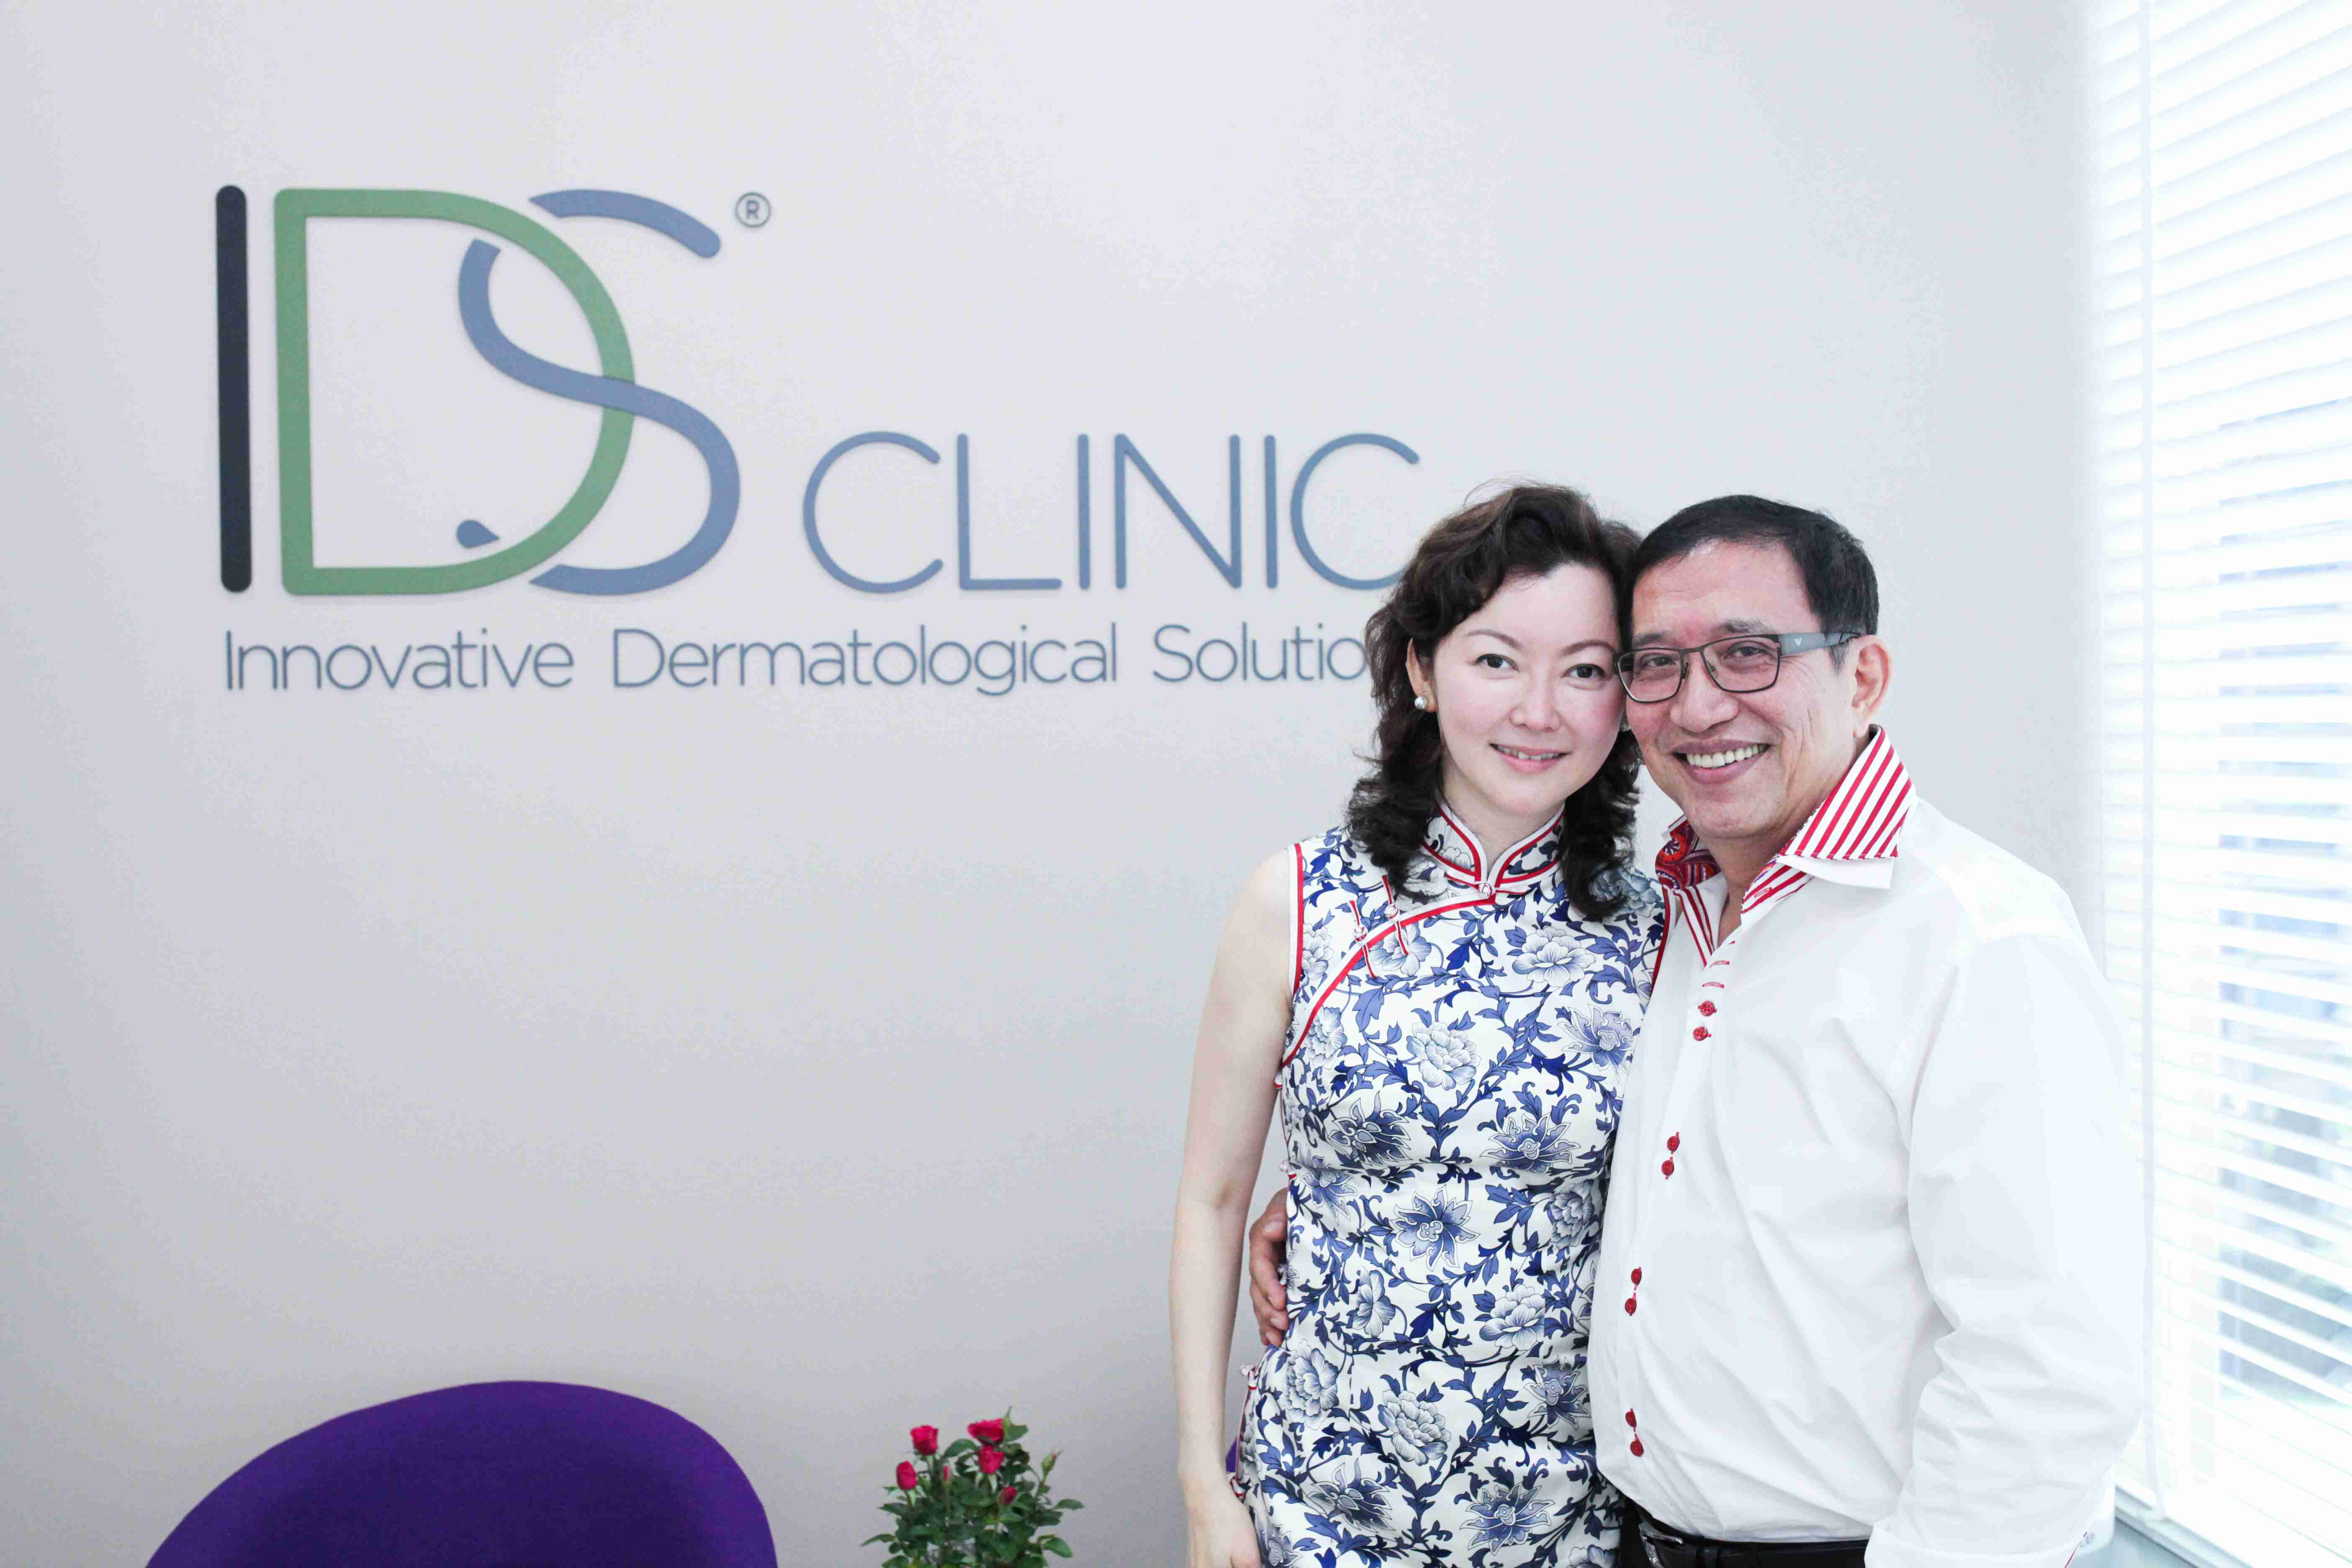 IDS Clinic - Media Launch Event (2014)